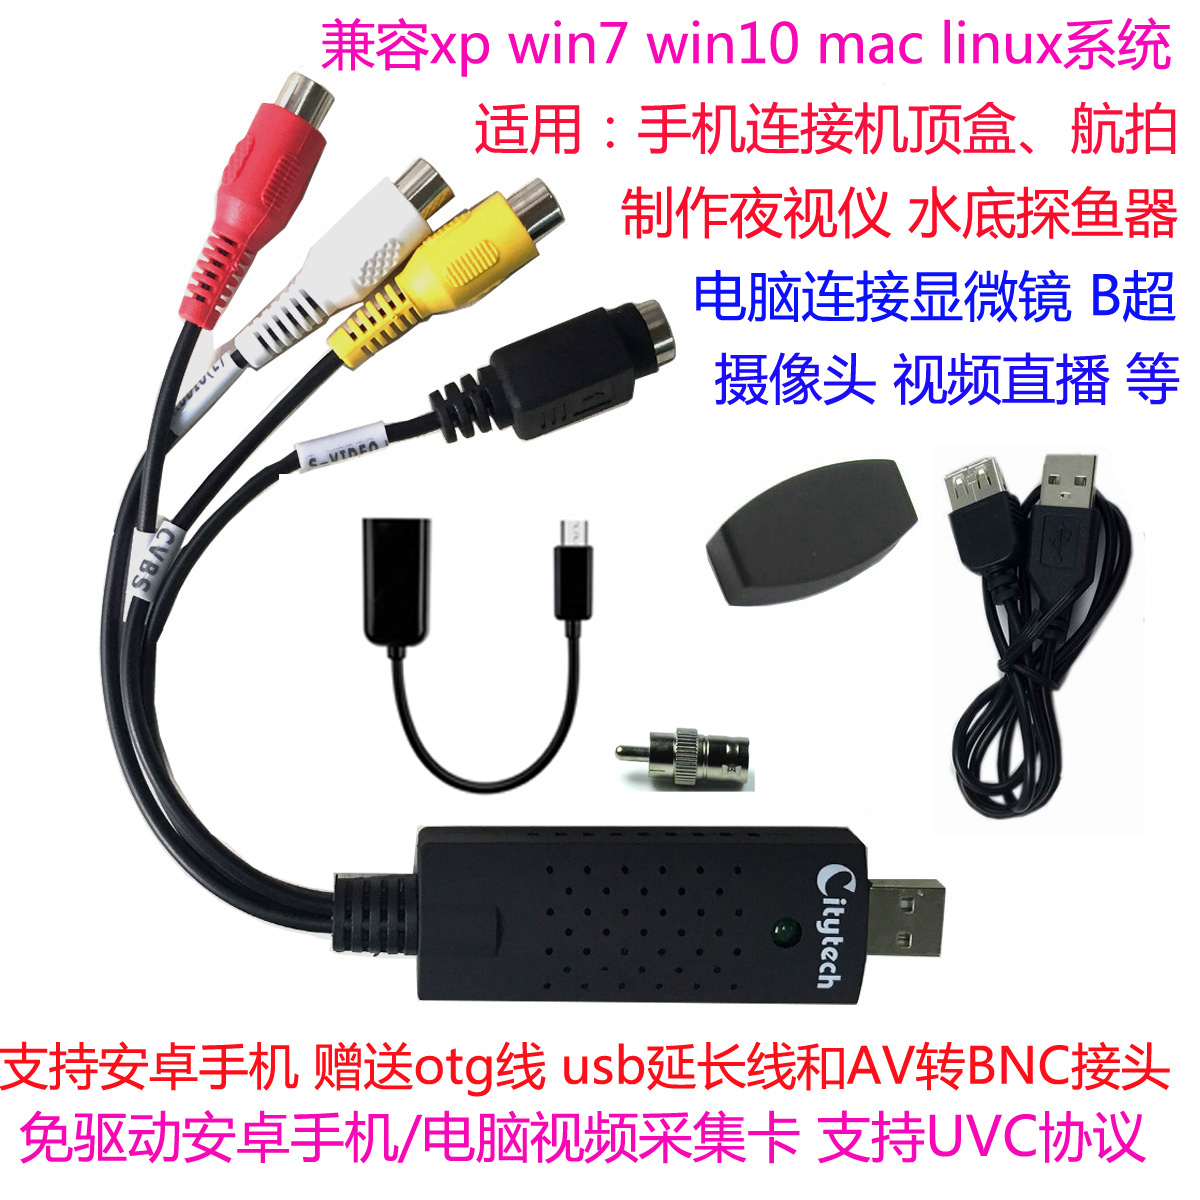 New limited drive-free USB video capture card notebook Android mobile phone OTG connected set-top box monitoring aerial photography